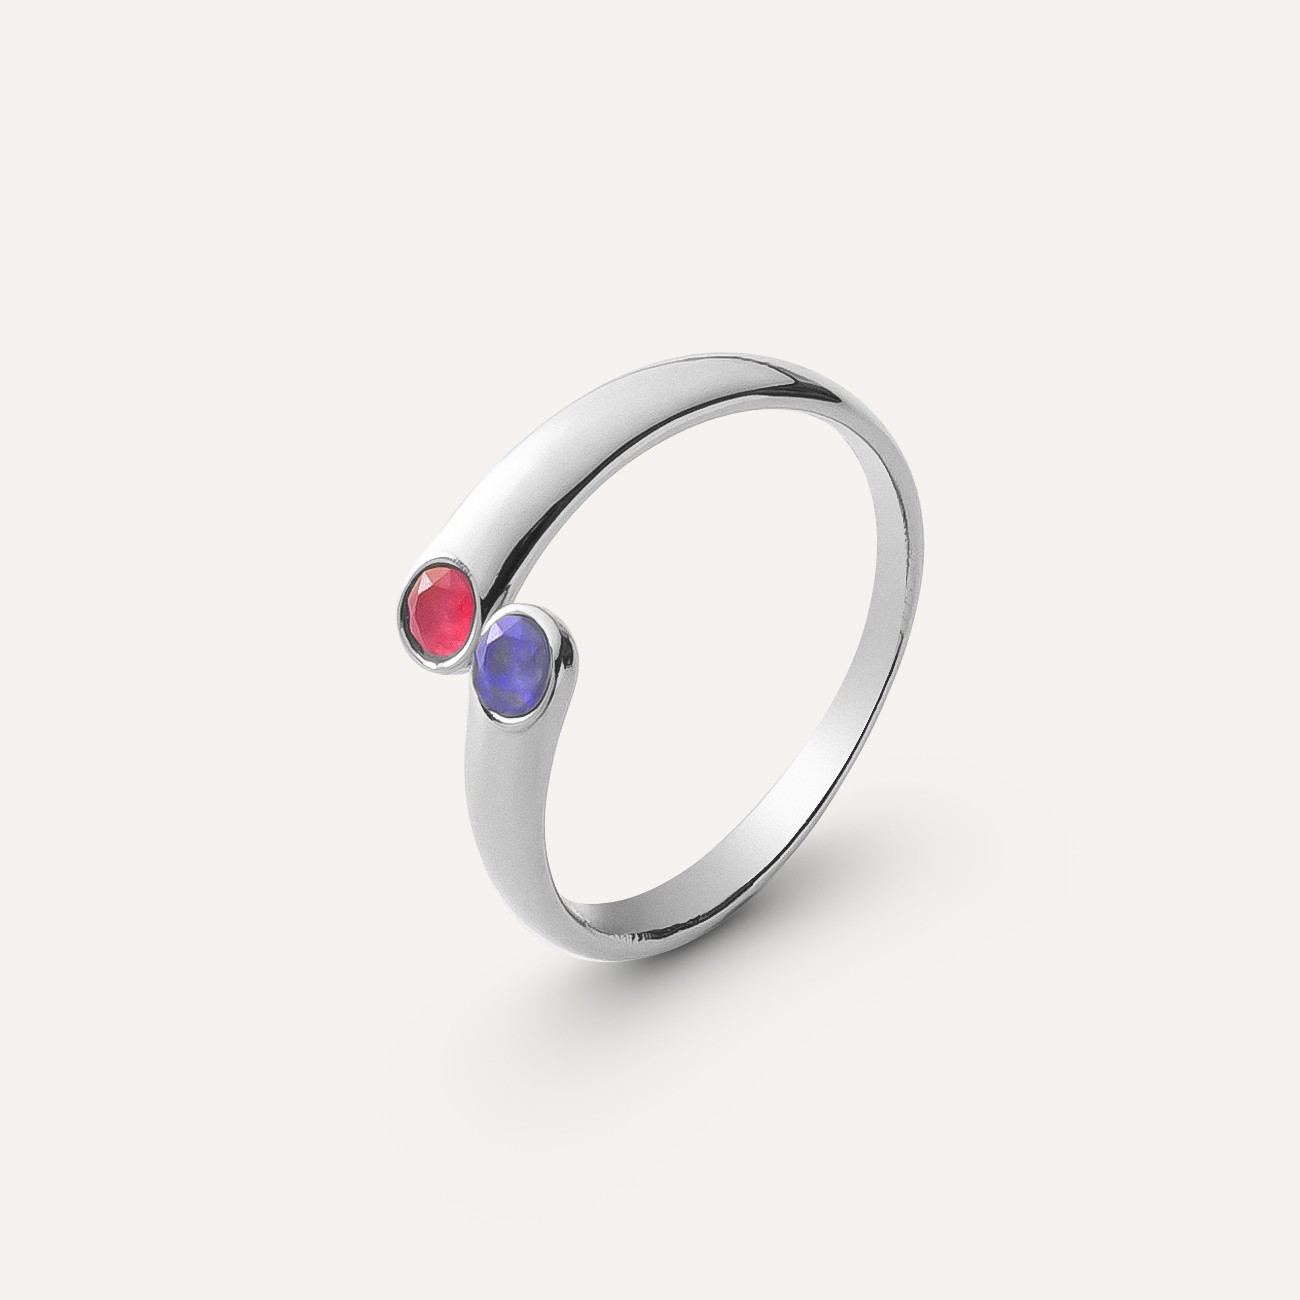 Universal ring with a colorful stones